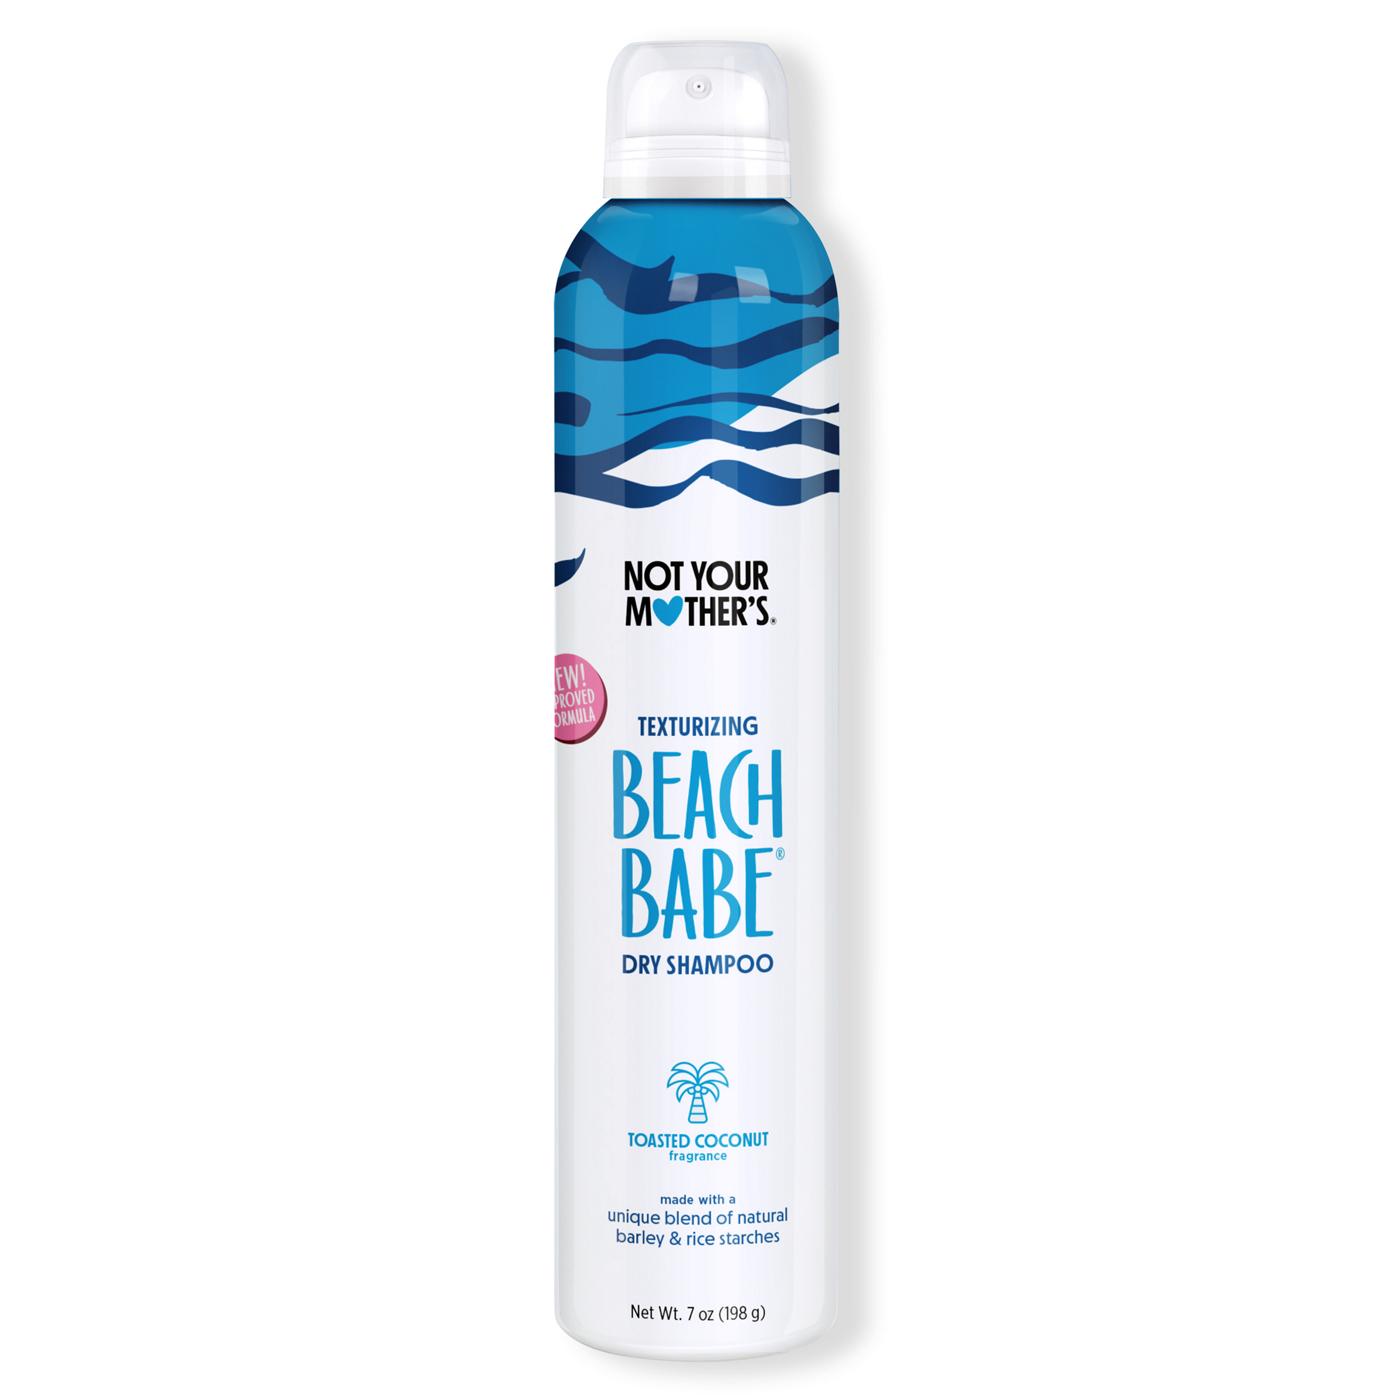 Not Your Mother's Beach Babe Texturizing Dry Shampoo - Toasted Coconut; image 1 of 3